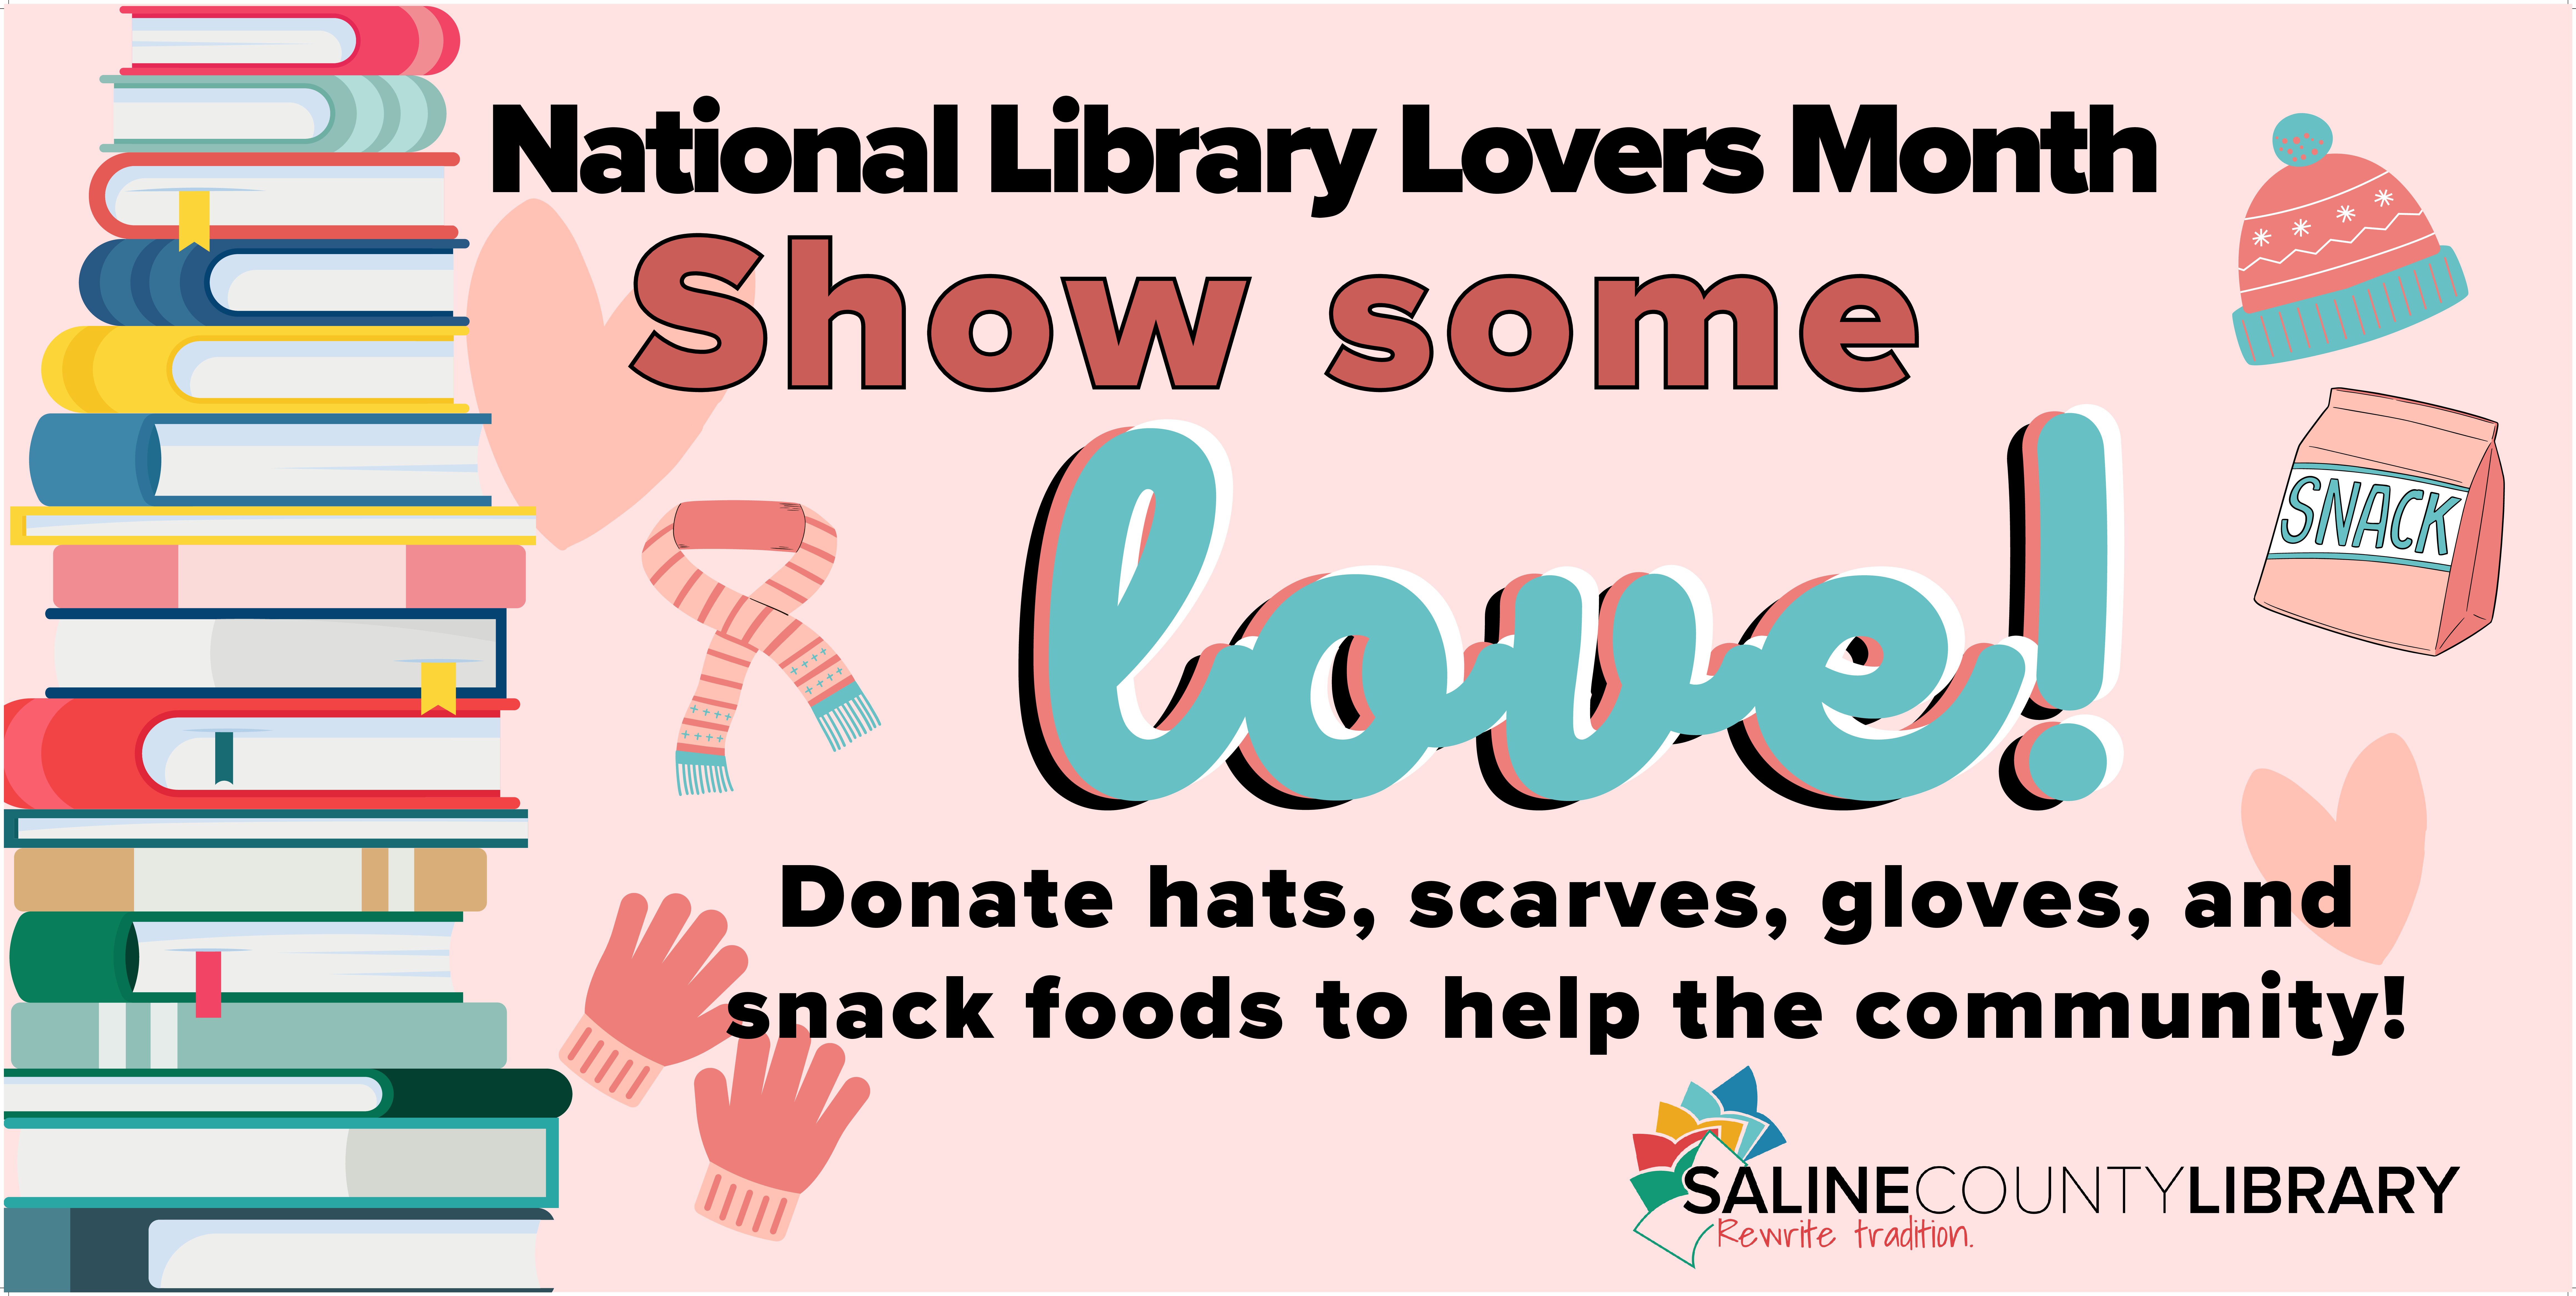 Show some love! It's National Library Lover's Month! Saline County